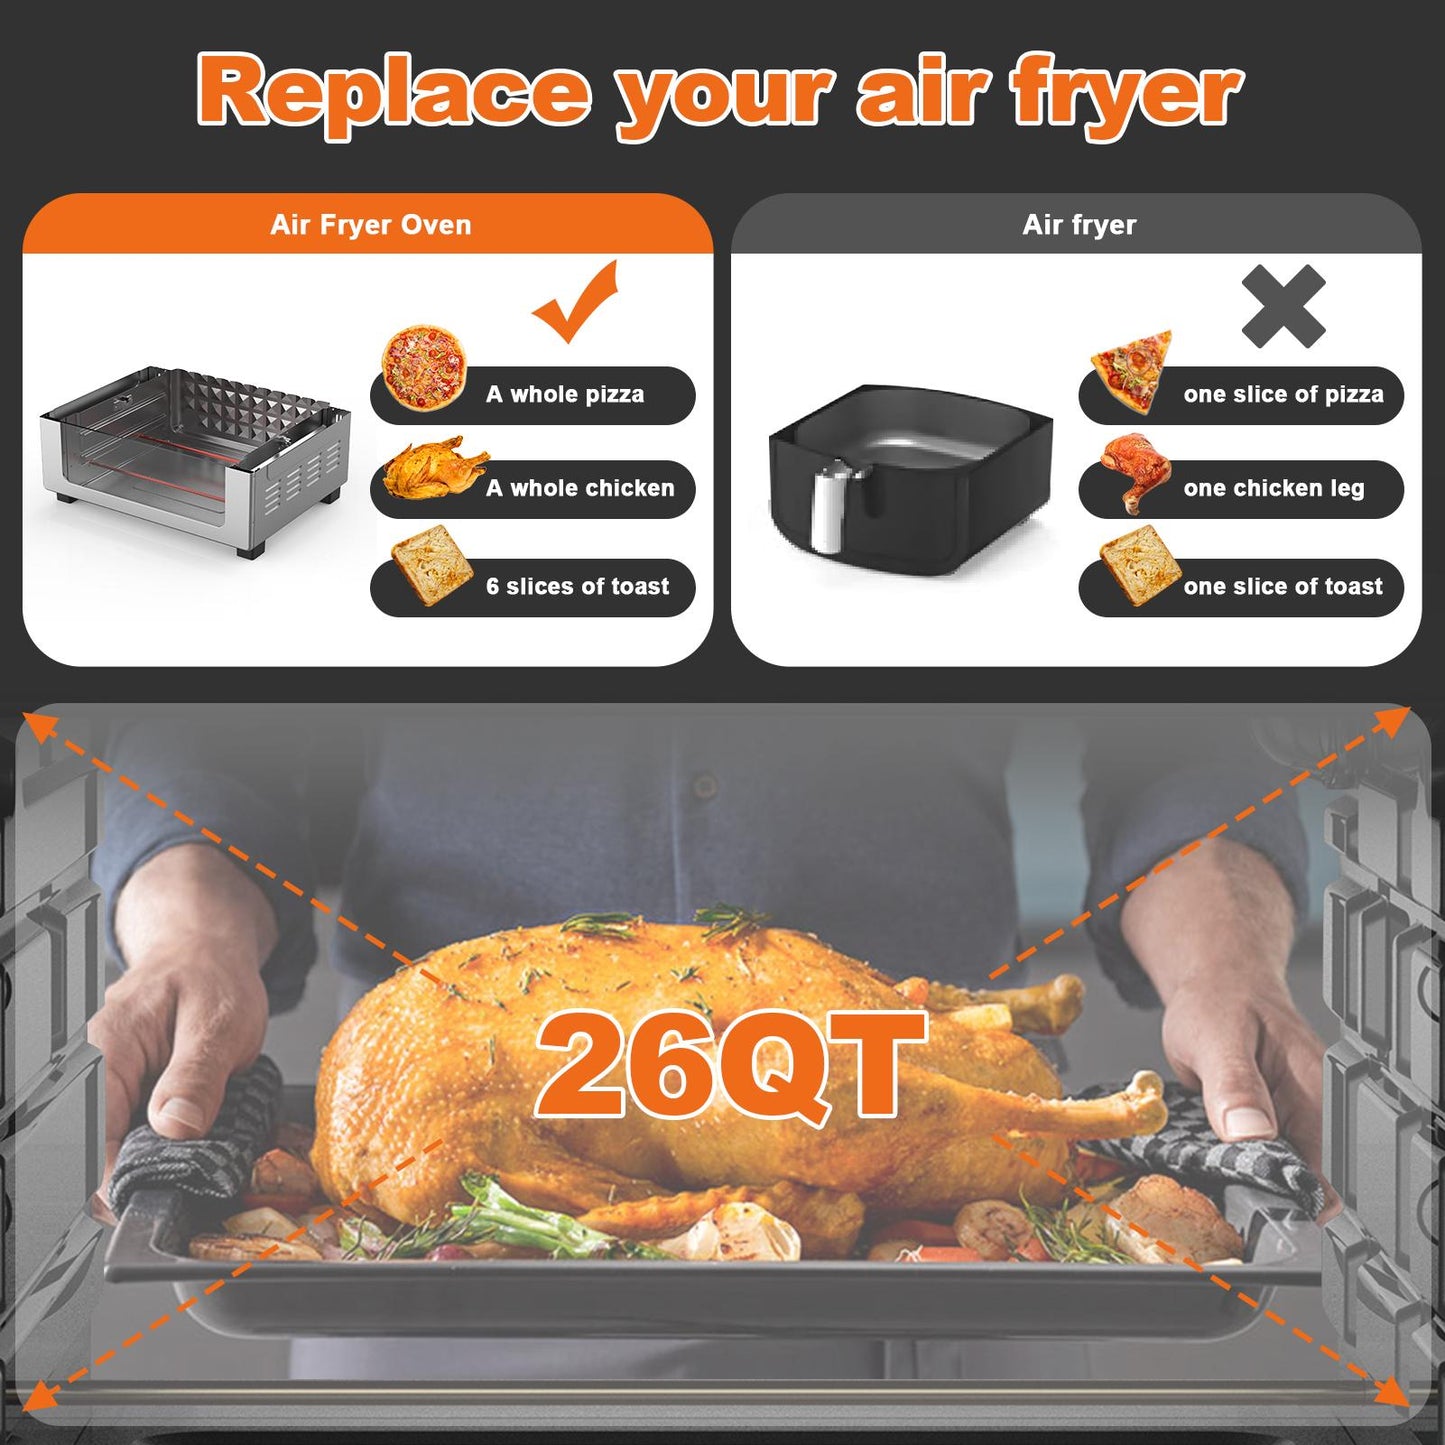 Geek Chef 26QT/26L Air Fryer Oven Combo, 6 Slice, Oil-Free Cooking